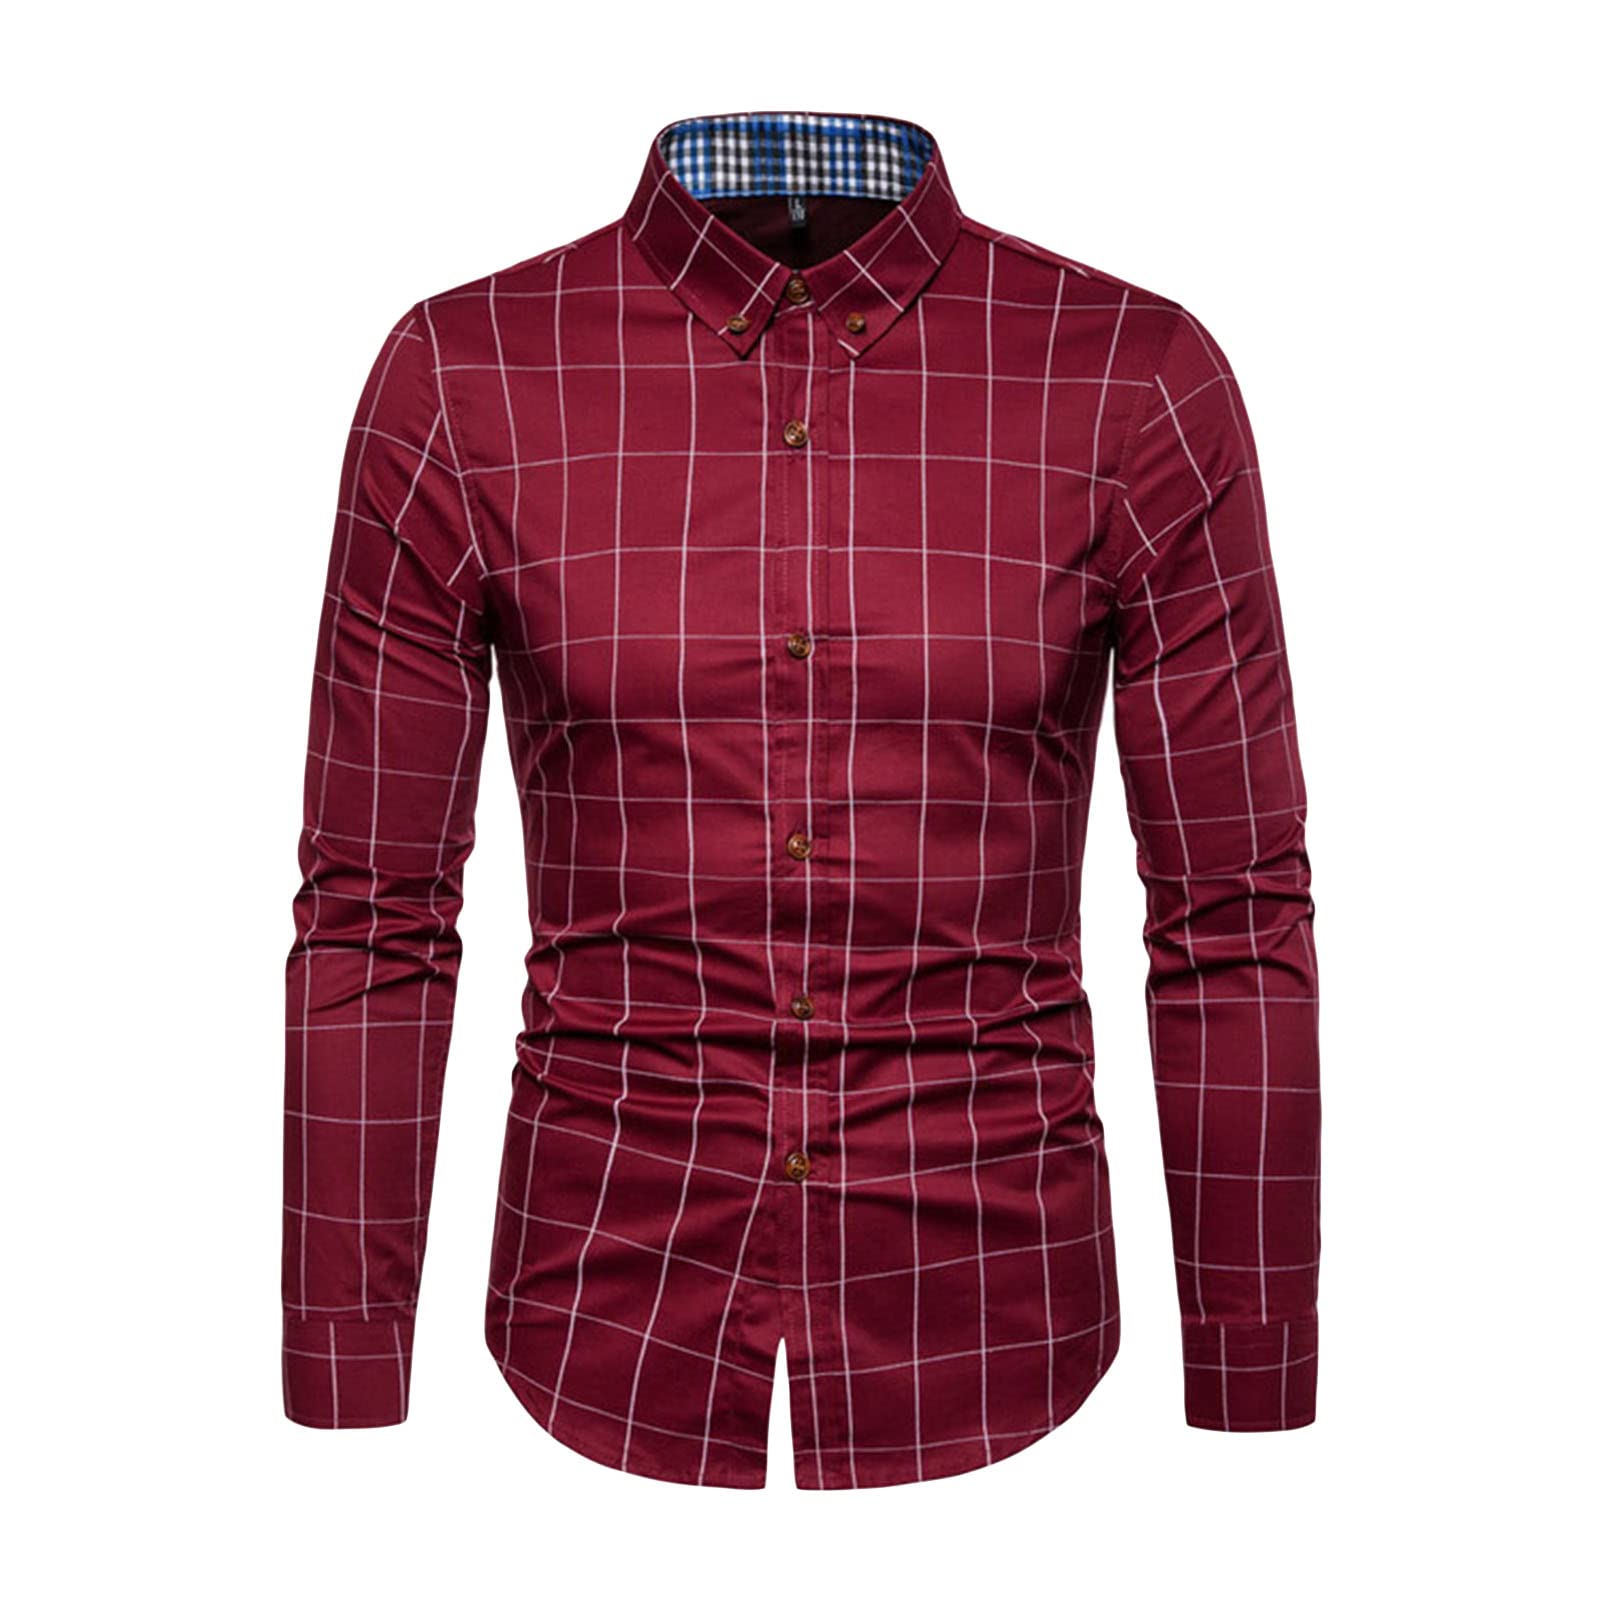 Men's Striped Wrinkle Free Dress Shirt Regular Fit Button Down Shirts Plaid Solid Slim Fit Long Sleeve Shirts (Red,5X-Large)